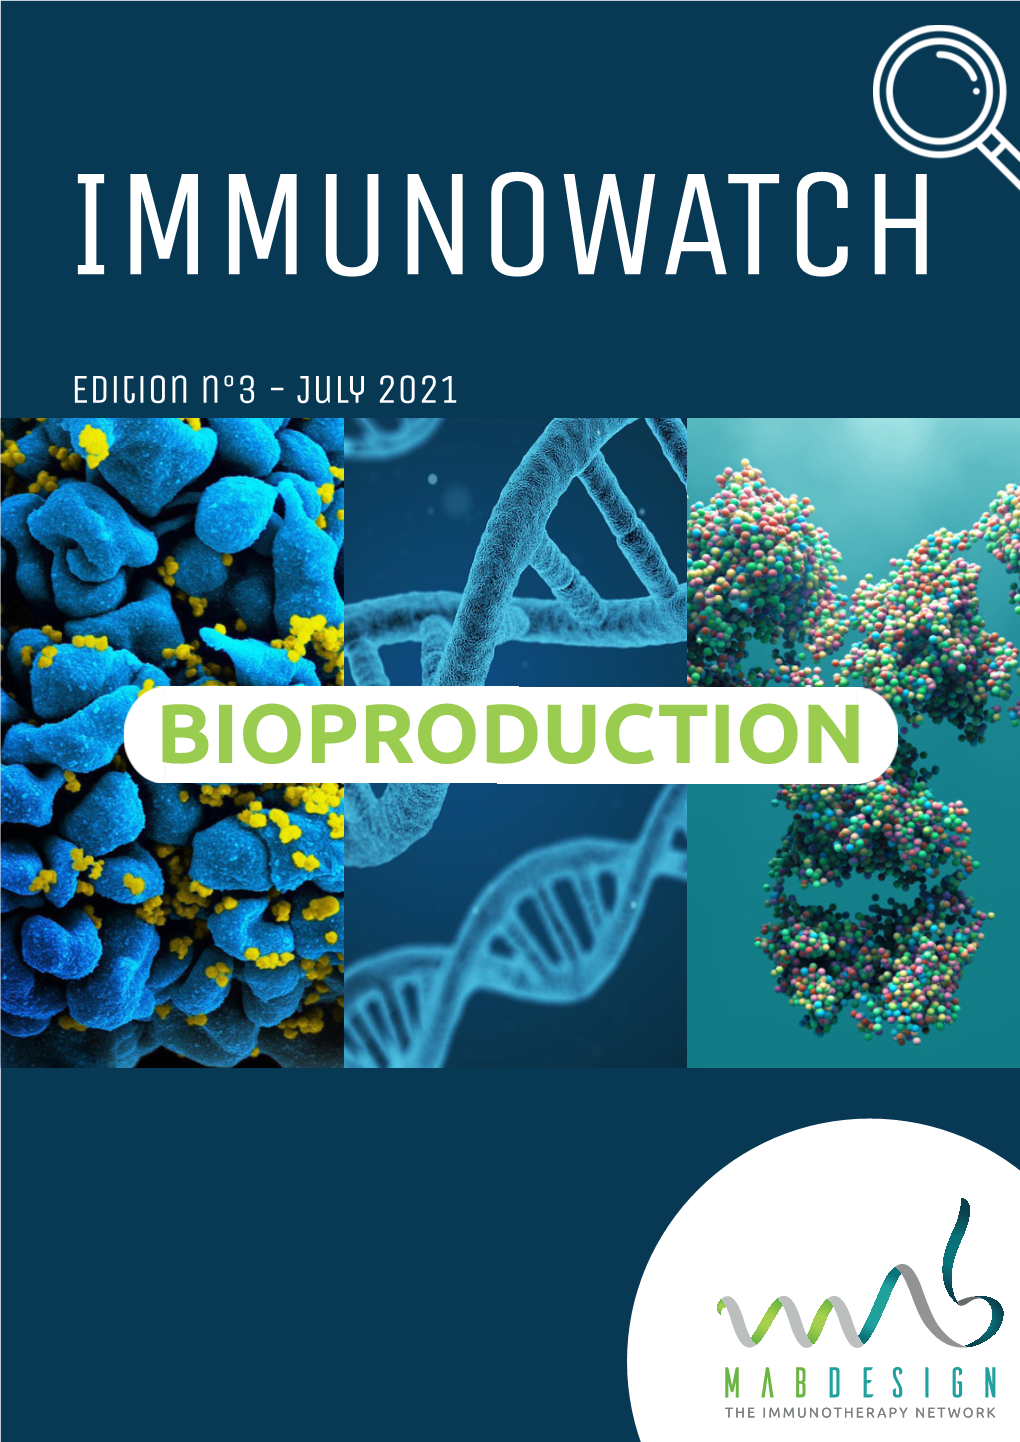 BIOPRODUCTION INTRODUCTION Mabdesign’S Immunowatch Is a One-Of-A-Kind Information Monitoring Newsletter in the Field of Biologics